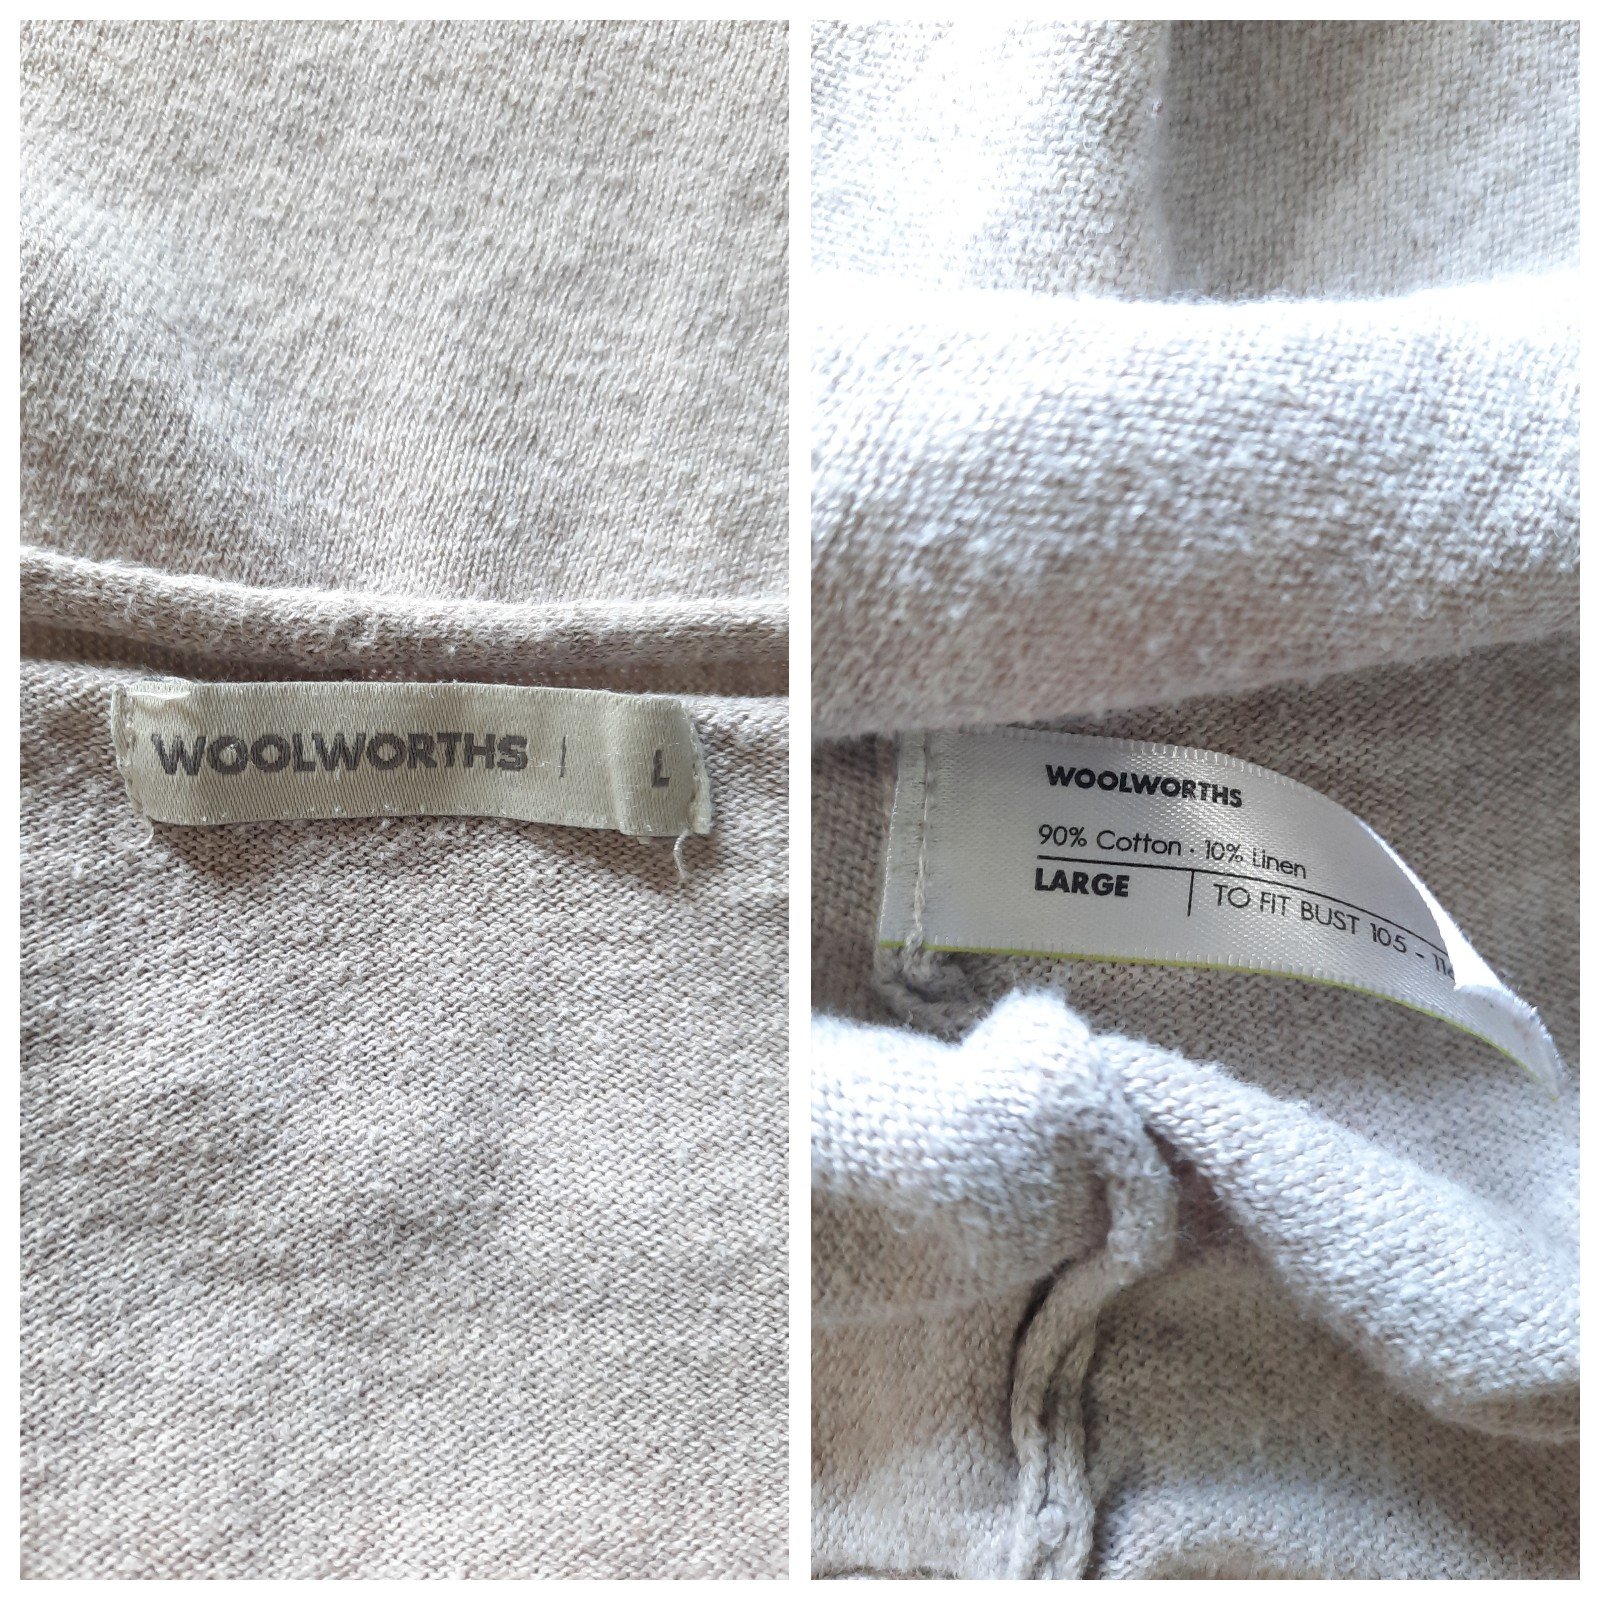 Cheap Woolworth Cream Open Front Cardigan Sweater k2uKQAwSg Great